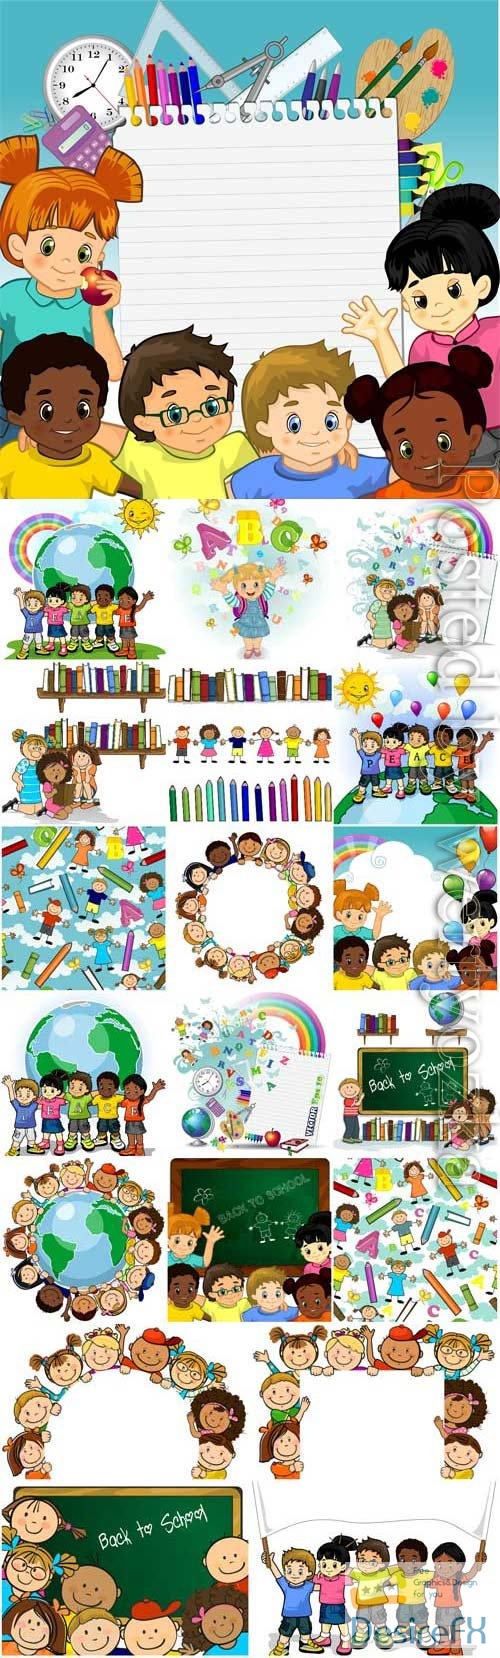 Children of different countries of the world in vector